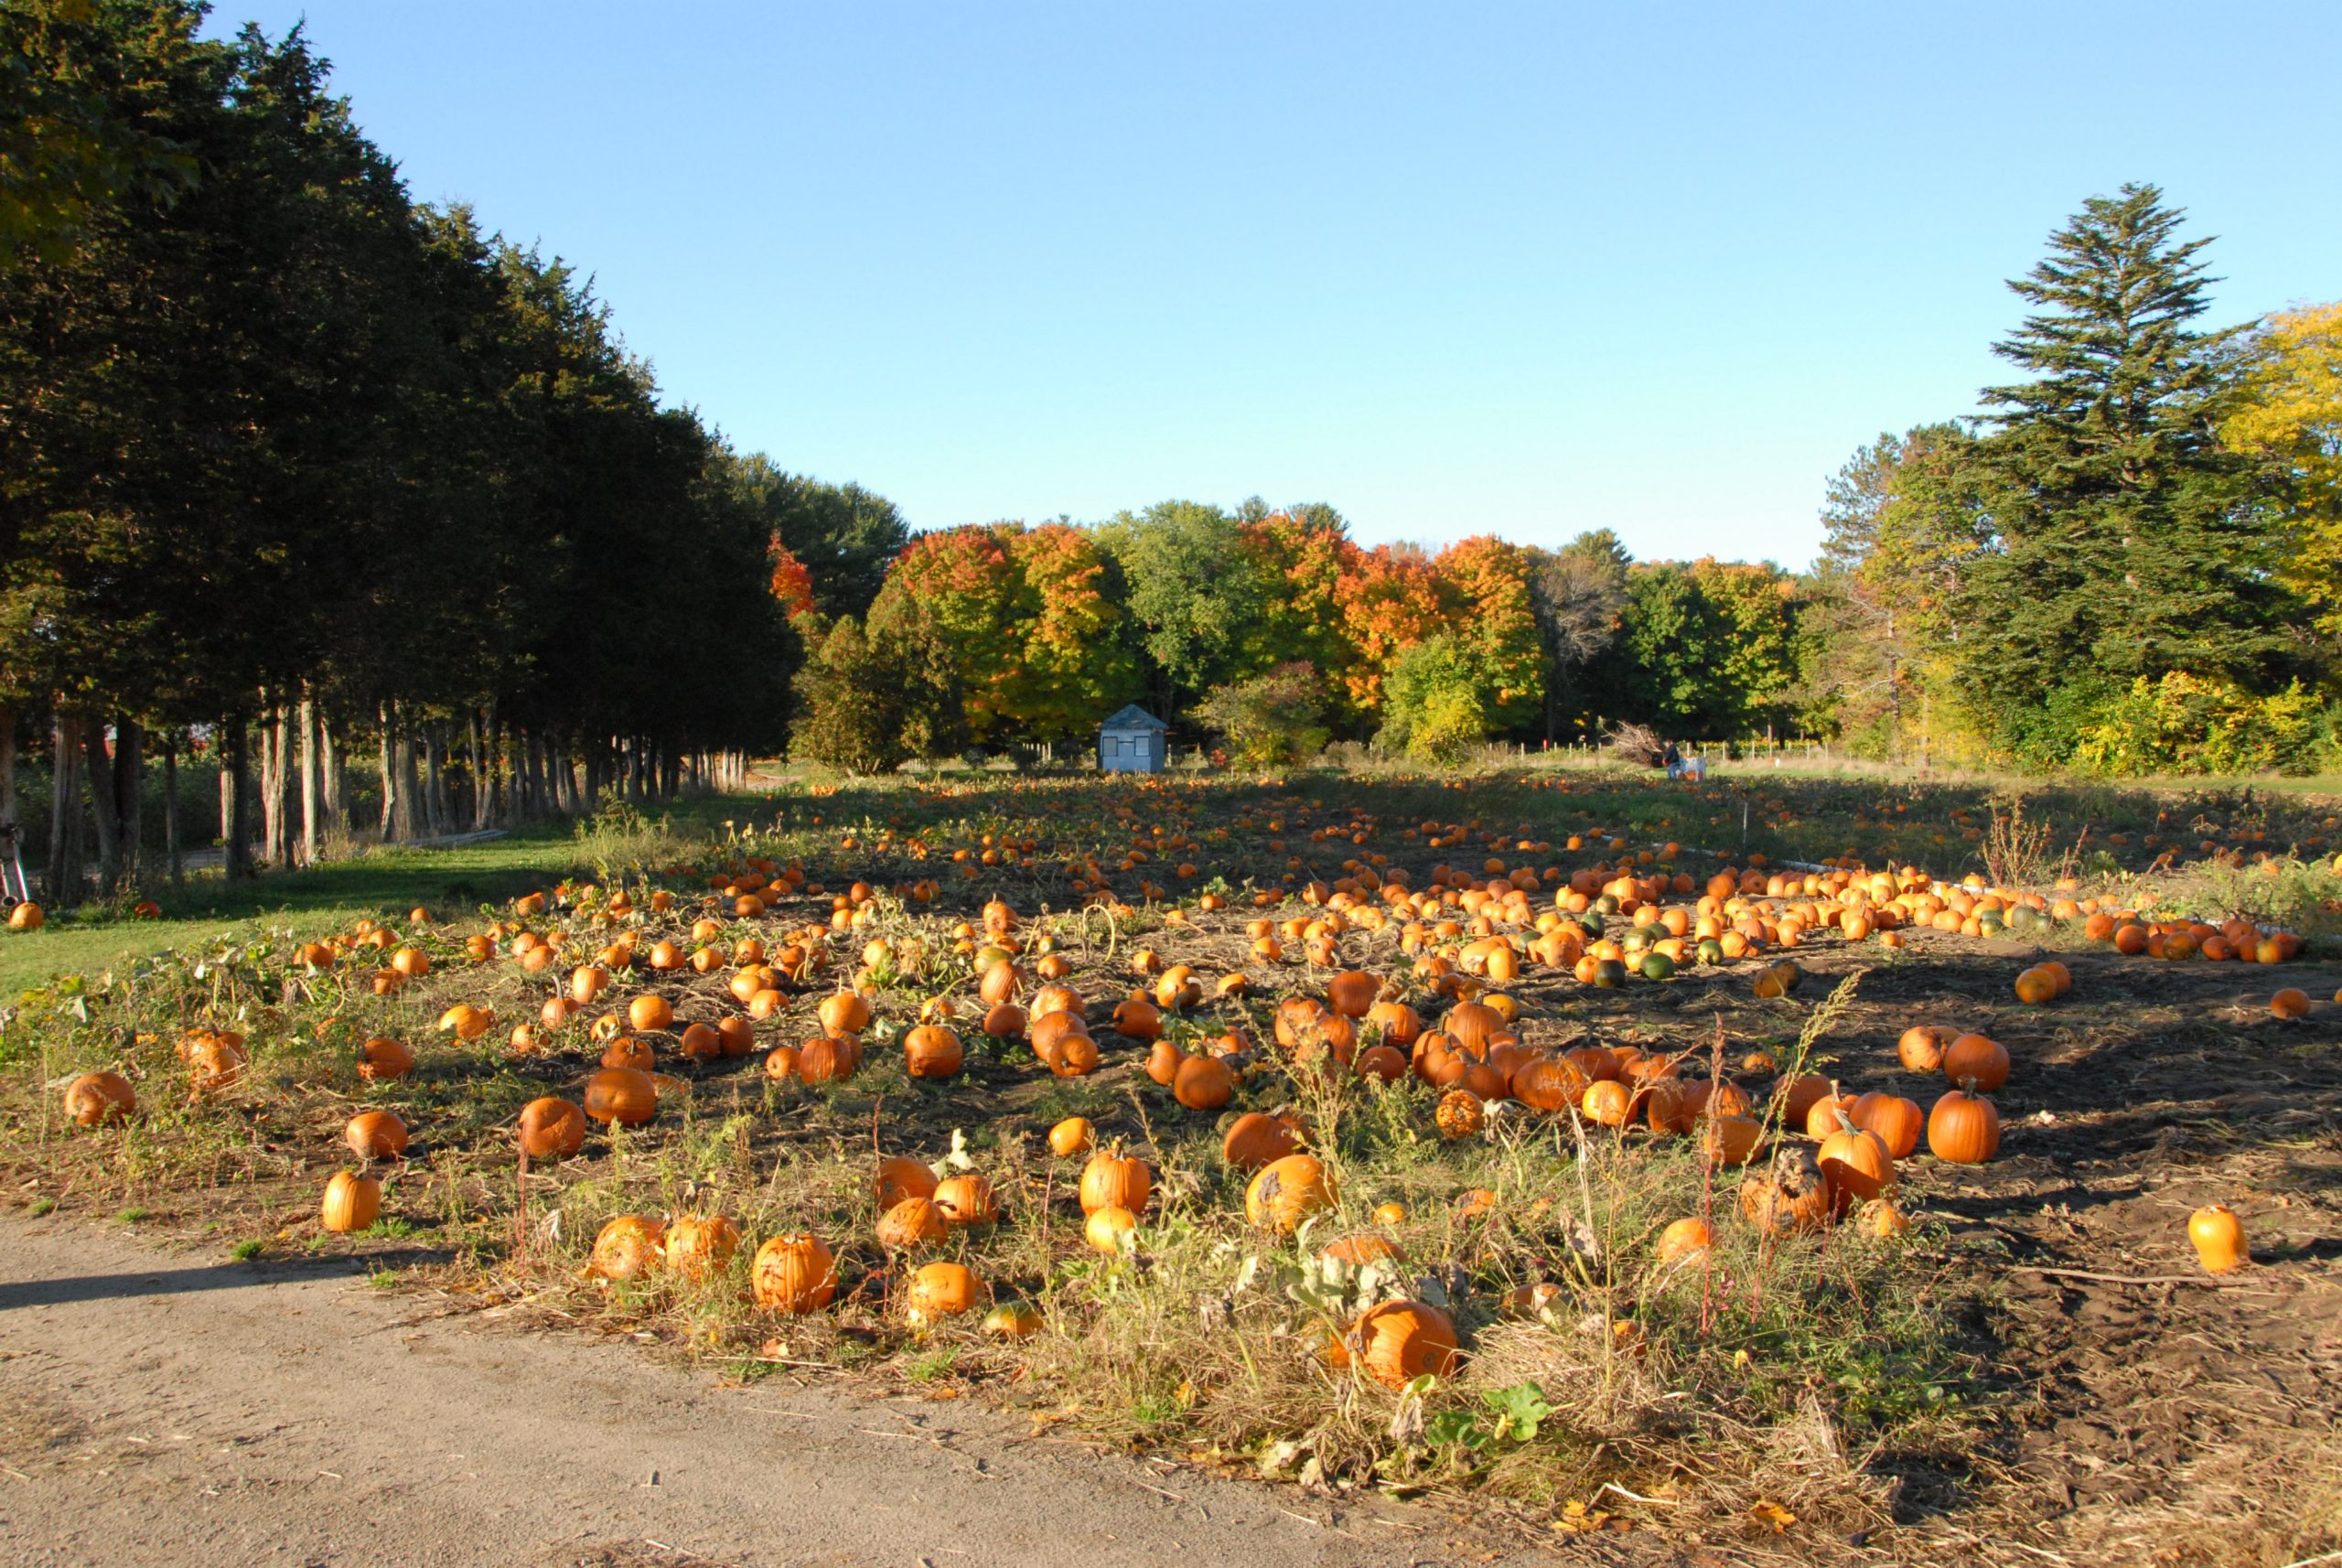 Farm Pumpkins (user submitted)